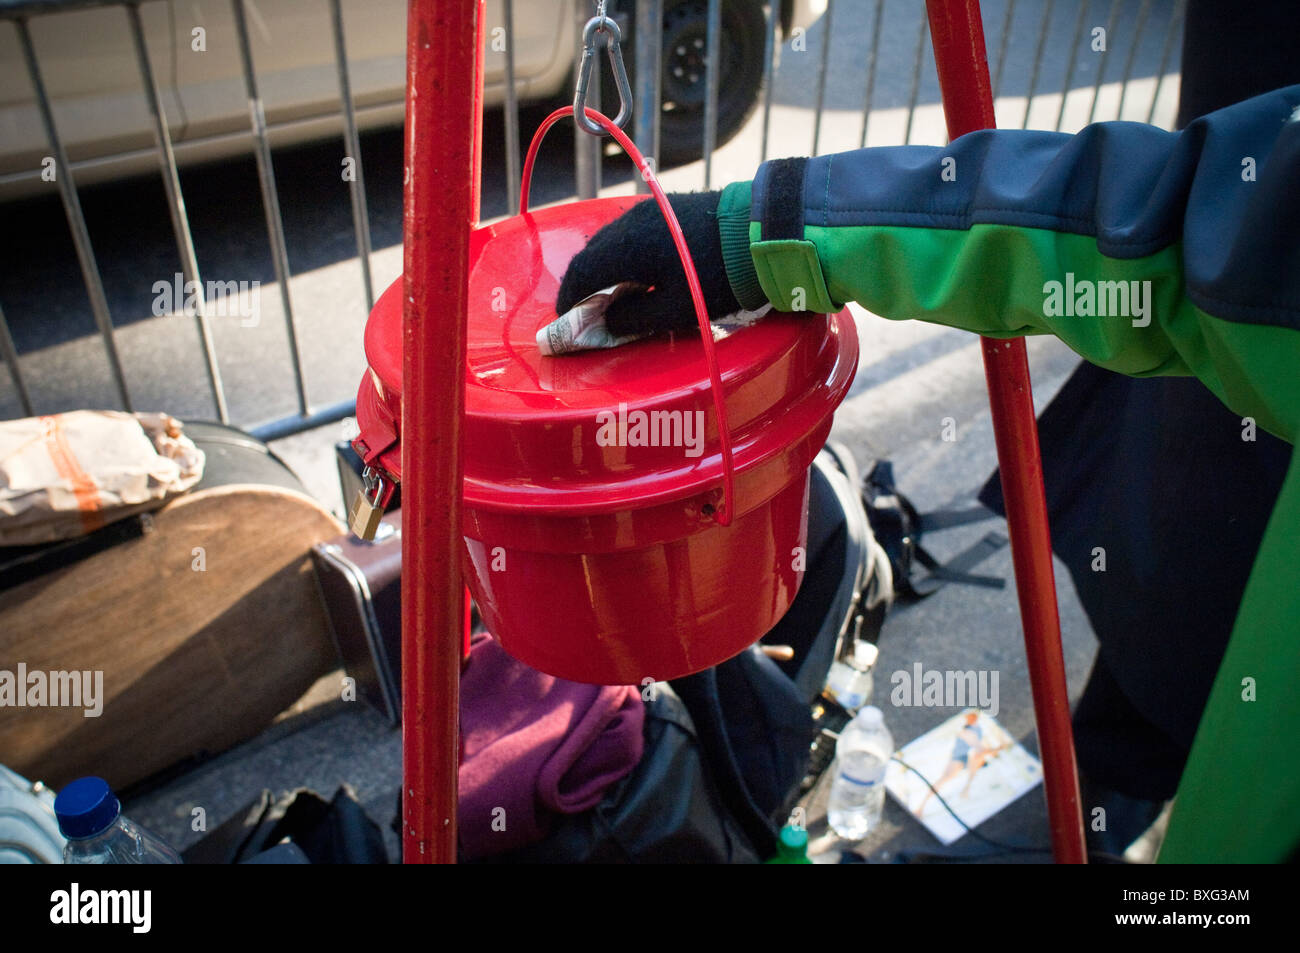 A passerby donates money to the Salvation Army's red kettle in Rockefeller Center in New York Stock Photo